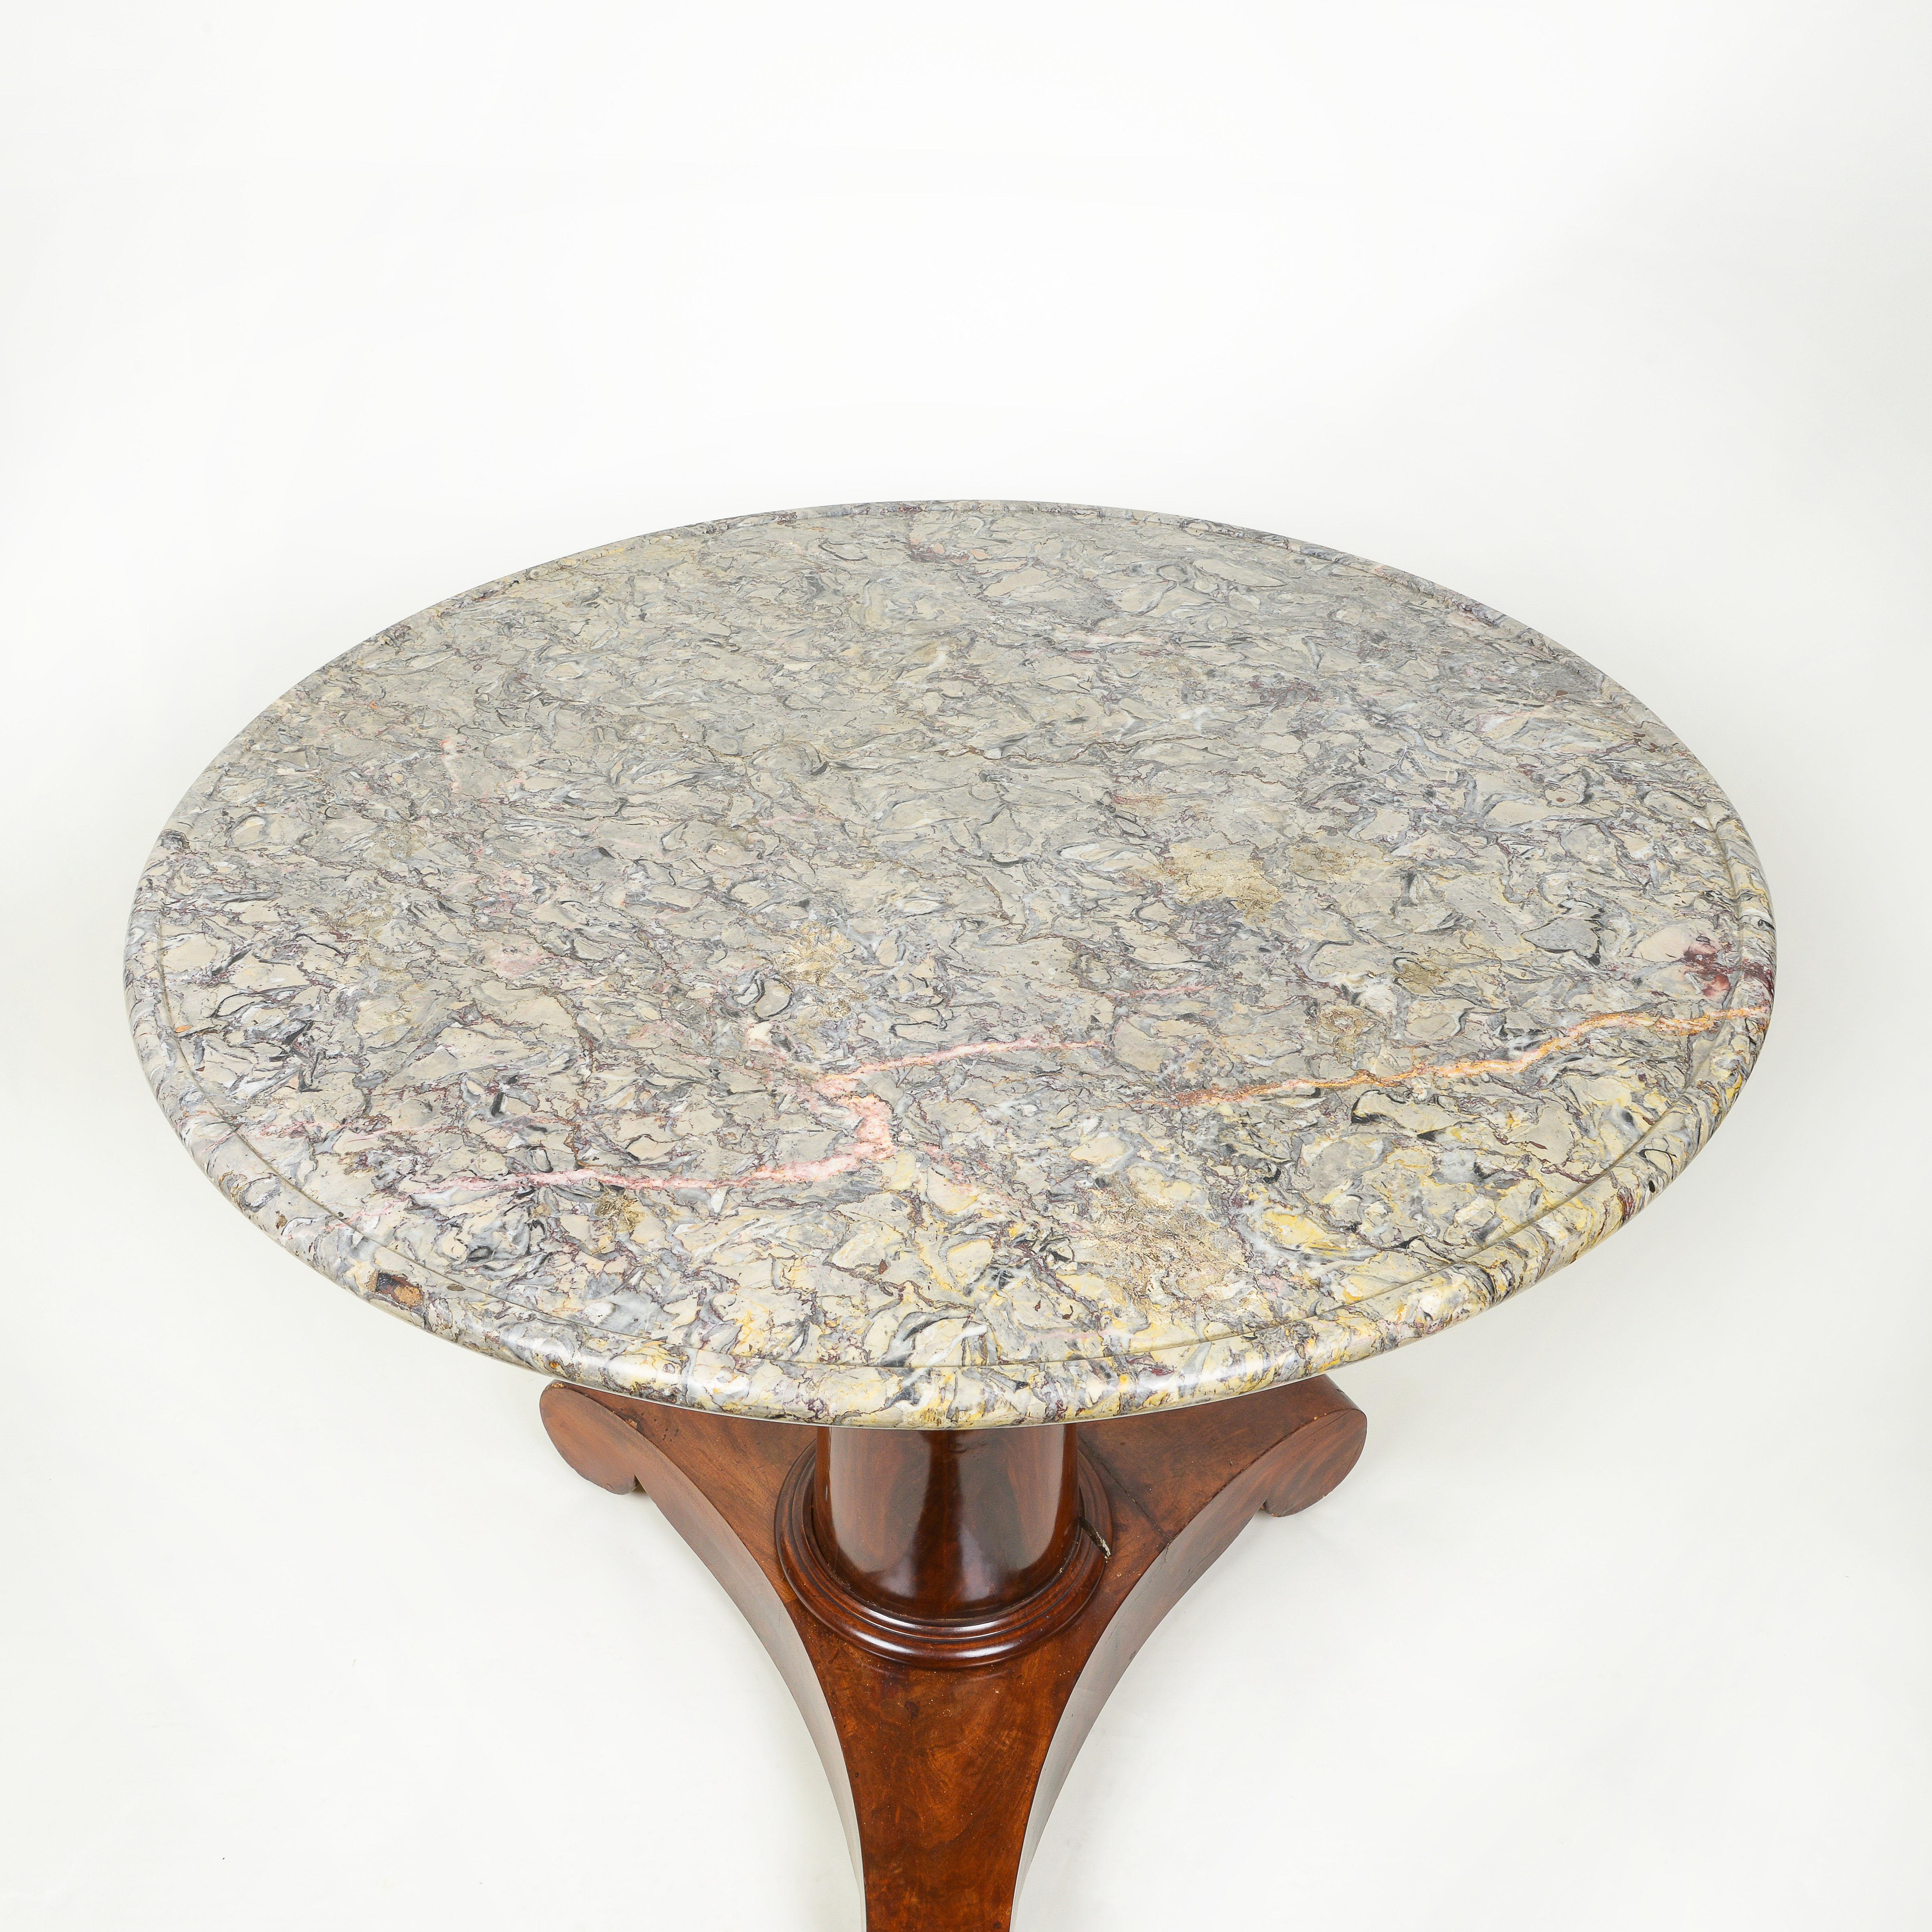 A French Empire Mahogany Gueridon with a Gray Marble Top In Good Condition For Sale In New York, NY